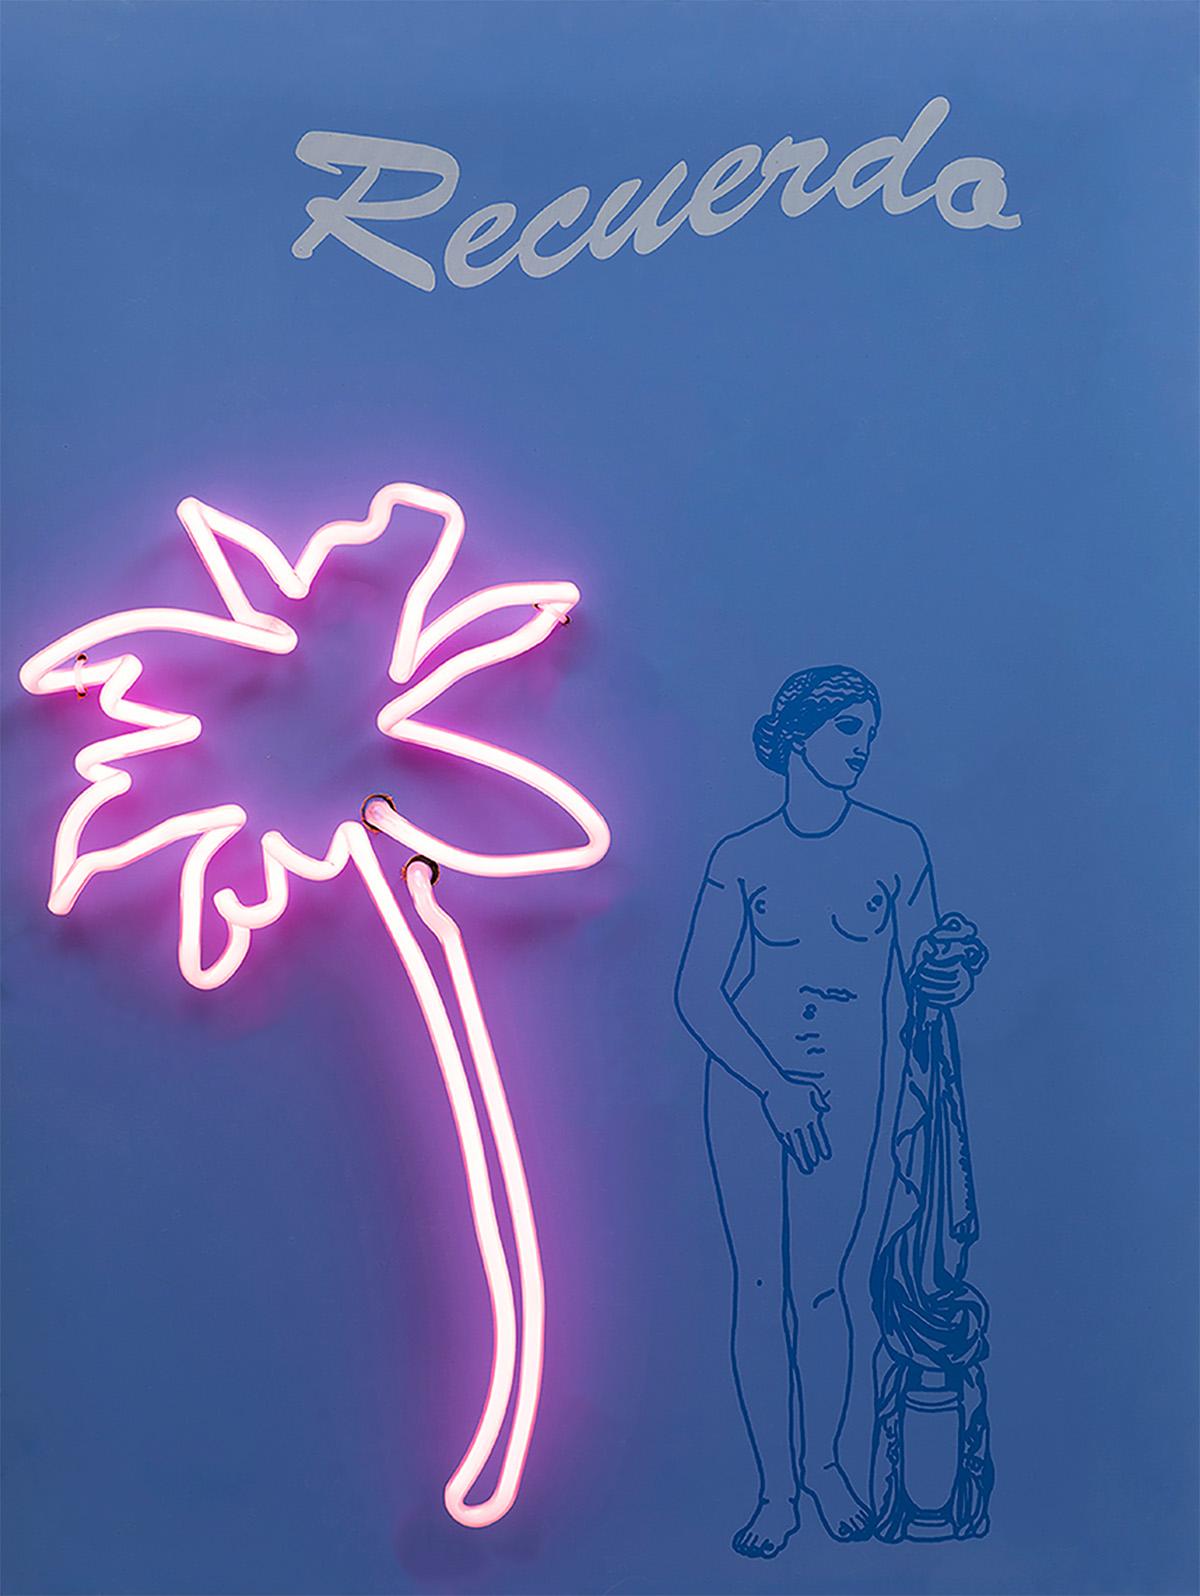 Recuerdo Aphrodite and La Mer Poseidon Diptych, 2019  Paloma Castello 
From the series Neon Classics
Screen printing with neon lights
Overall size: 24 H in x 36.2 W x 5.9 D in. 
Individual size: 24 H in x 18.1 W x 5.9 D in. 
Edition 7/10

In her